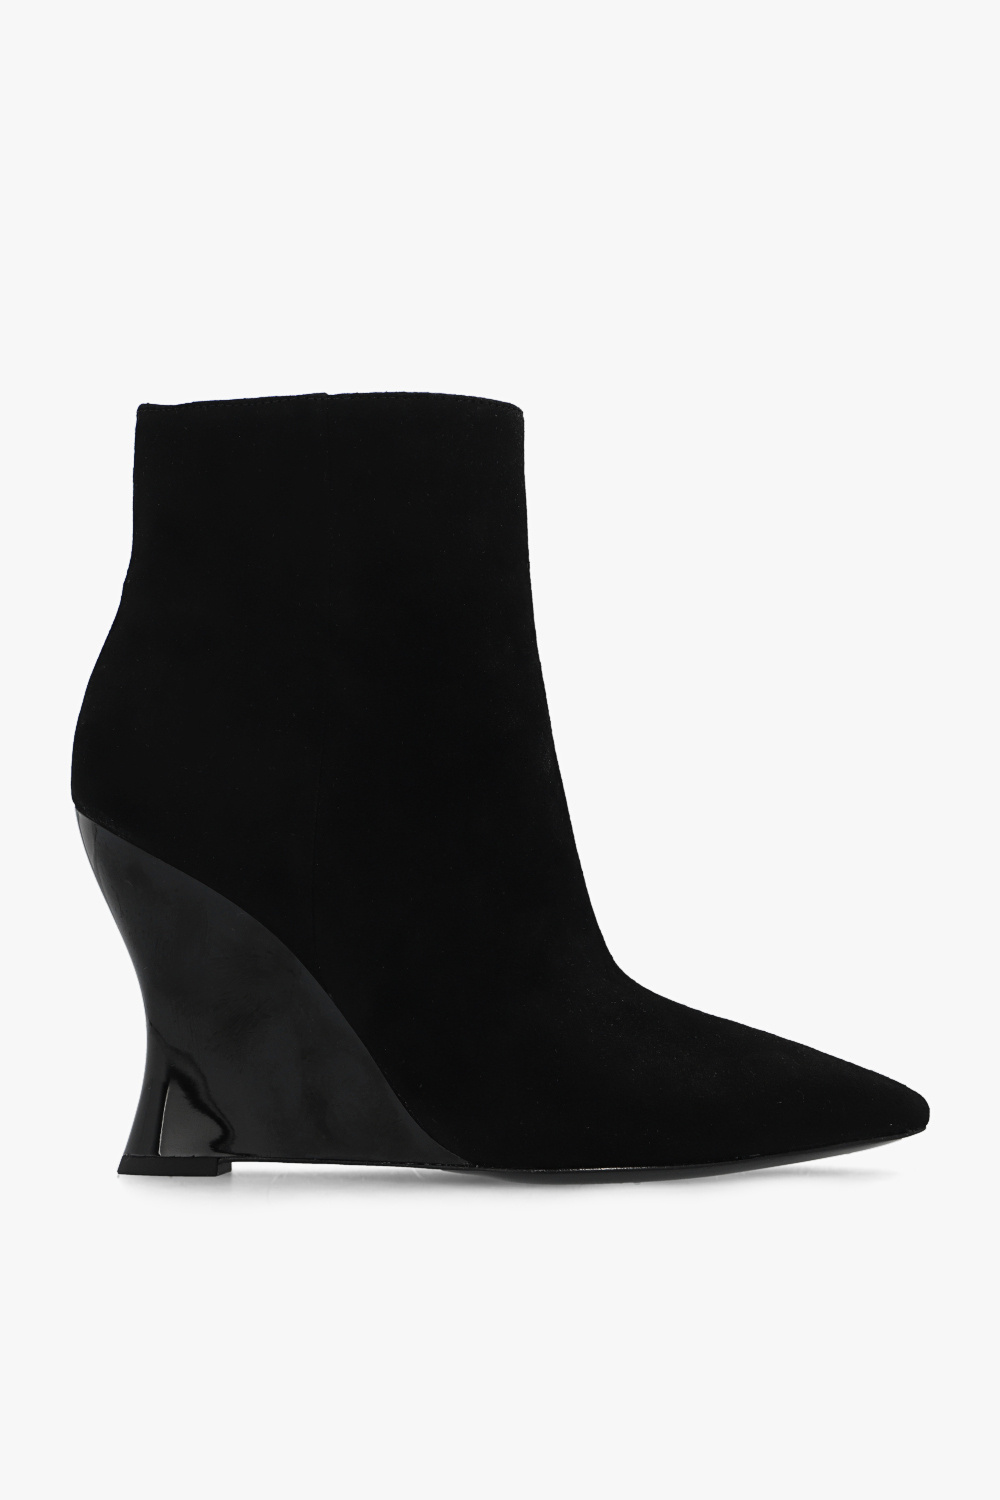 Tory Burch Black Wedge Boots: Get Ready for a Classy Look with Arriba ...